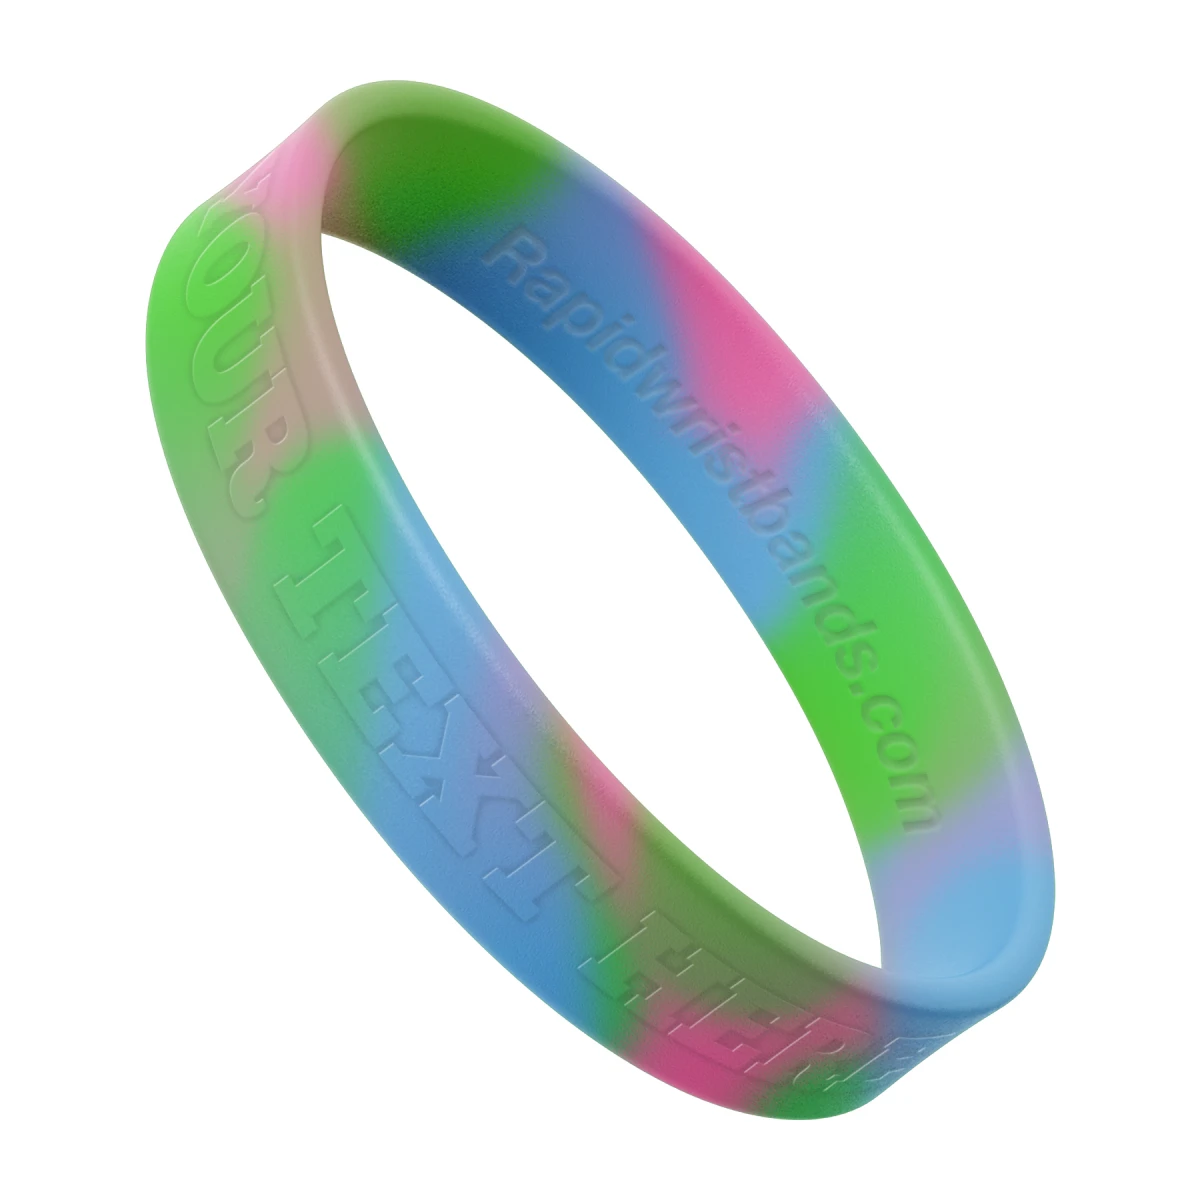 Swirl Light Green/Light Blue/Pink Wristband With Your Text Here Embossed